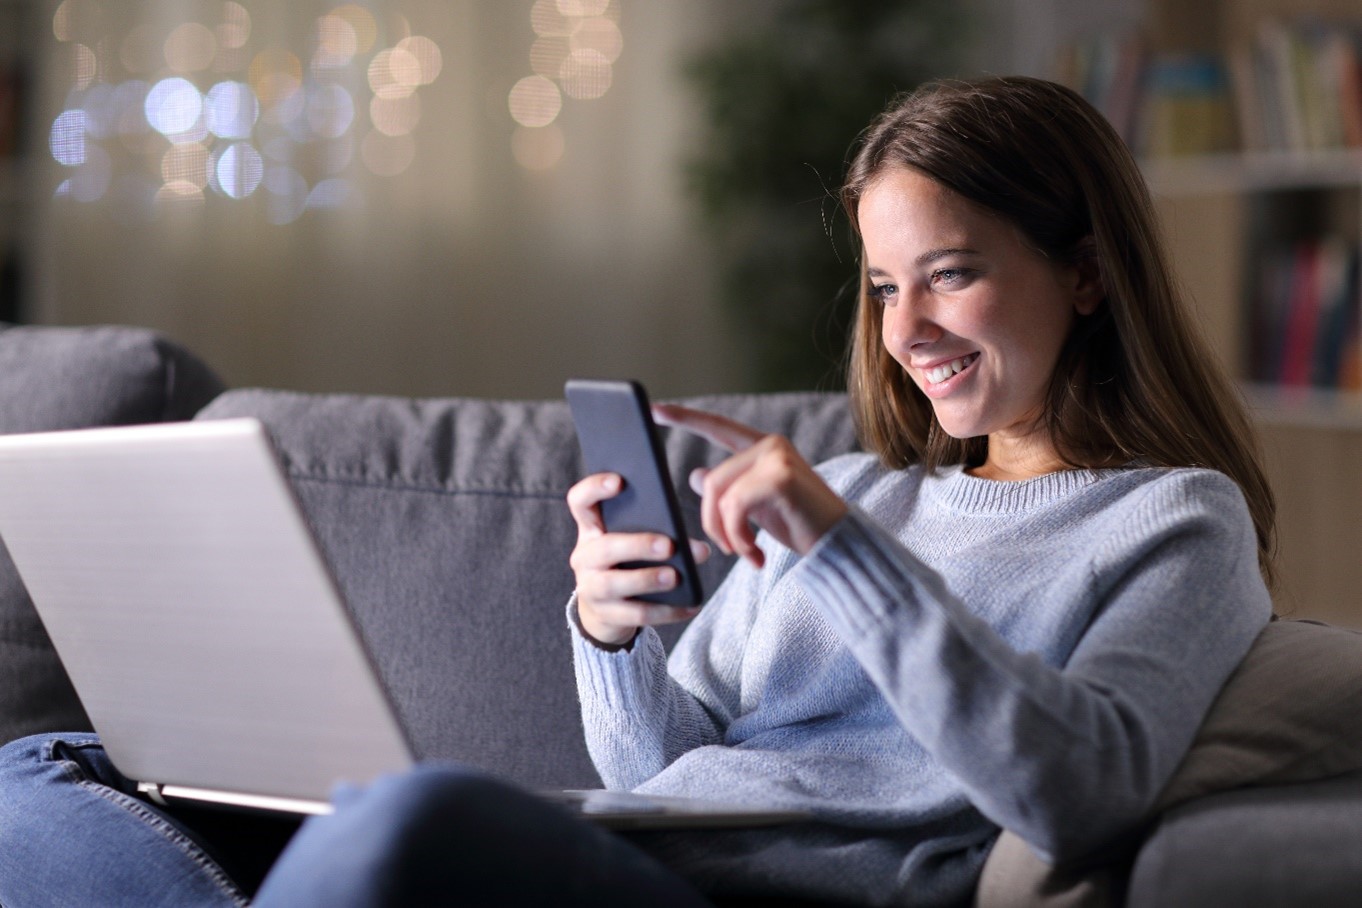 Woman smiling, using a mobile phone and laptop.